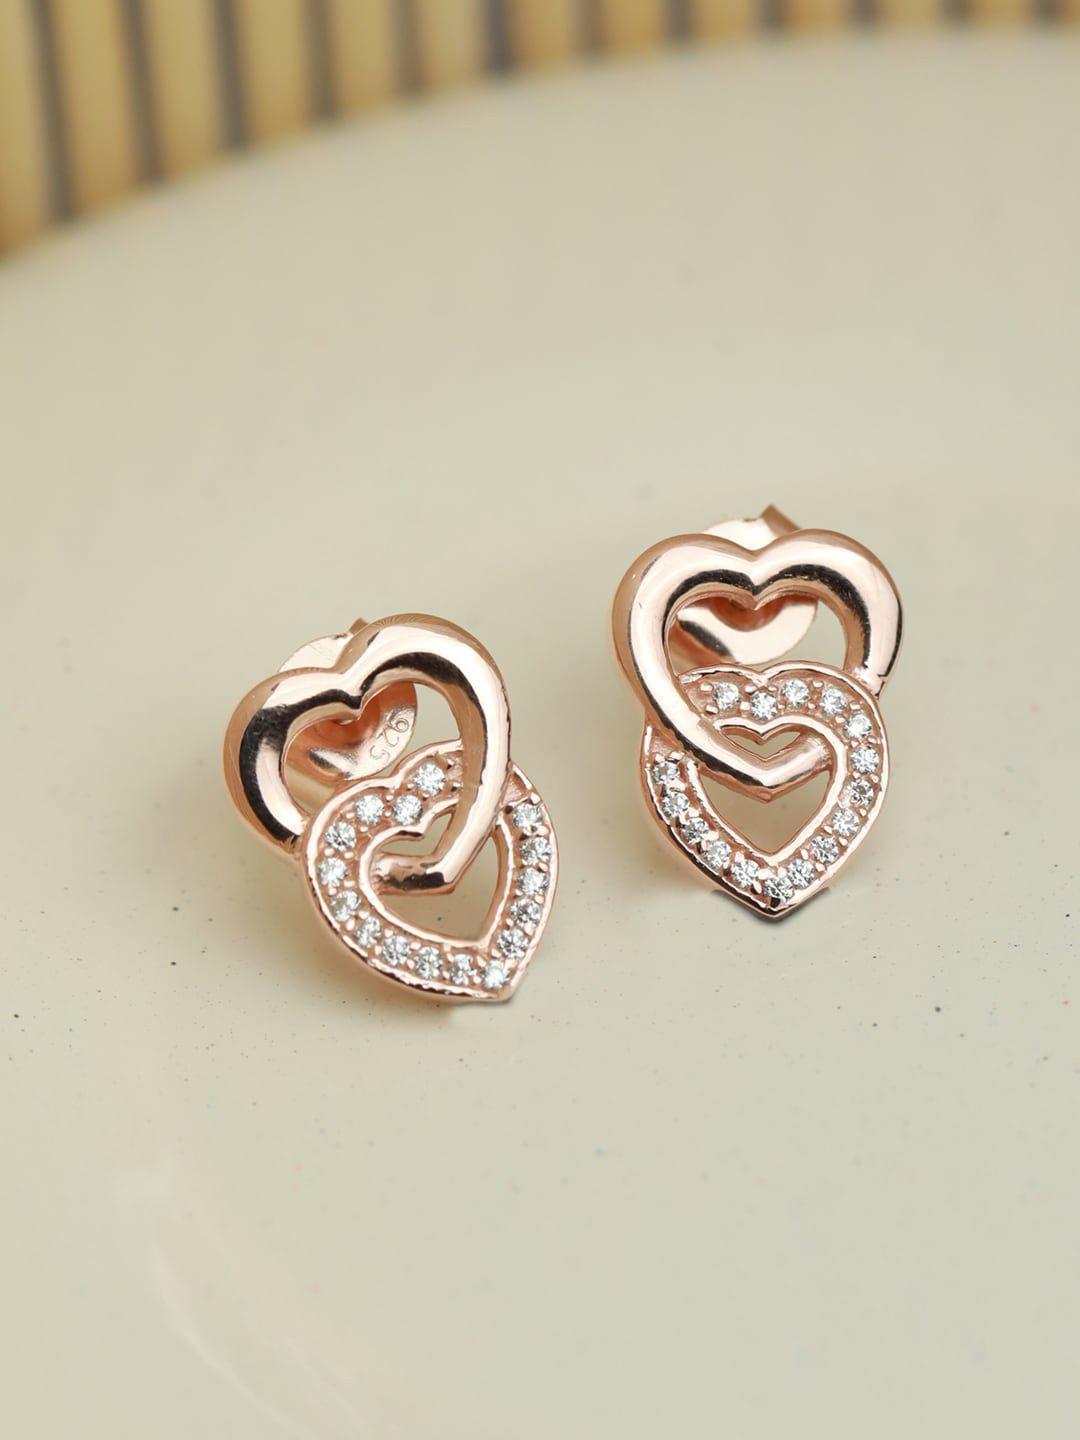 sheer by priyaasi rose gold-plated 92.5 sterling silver heart shaped studs